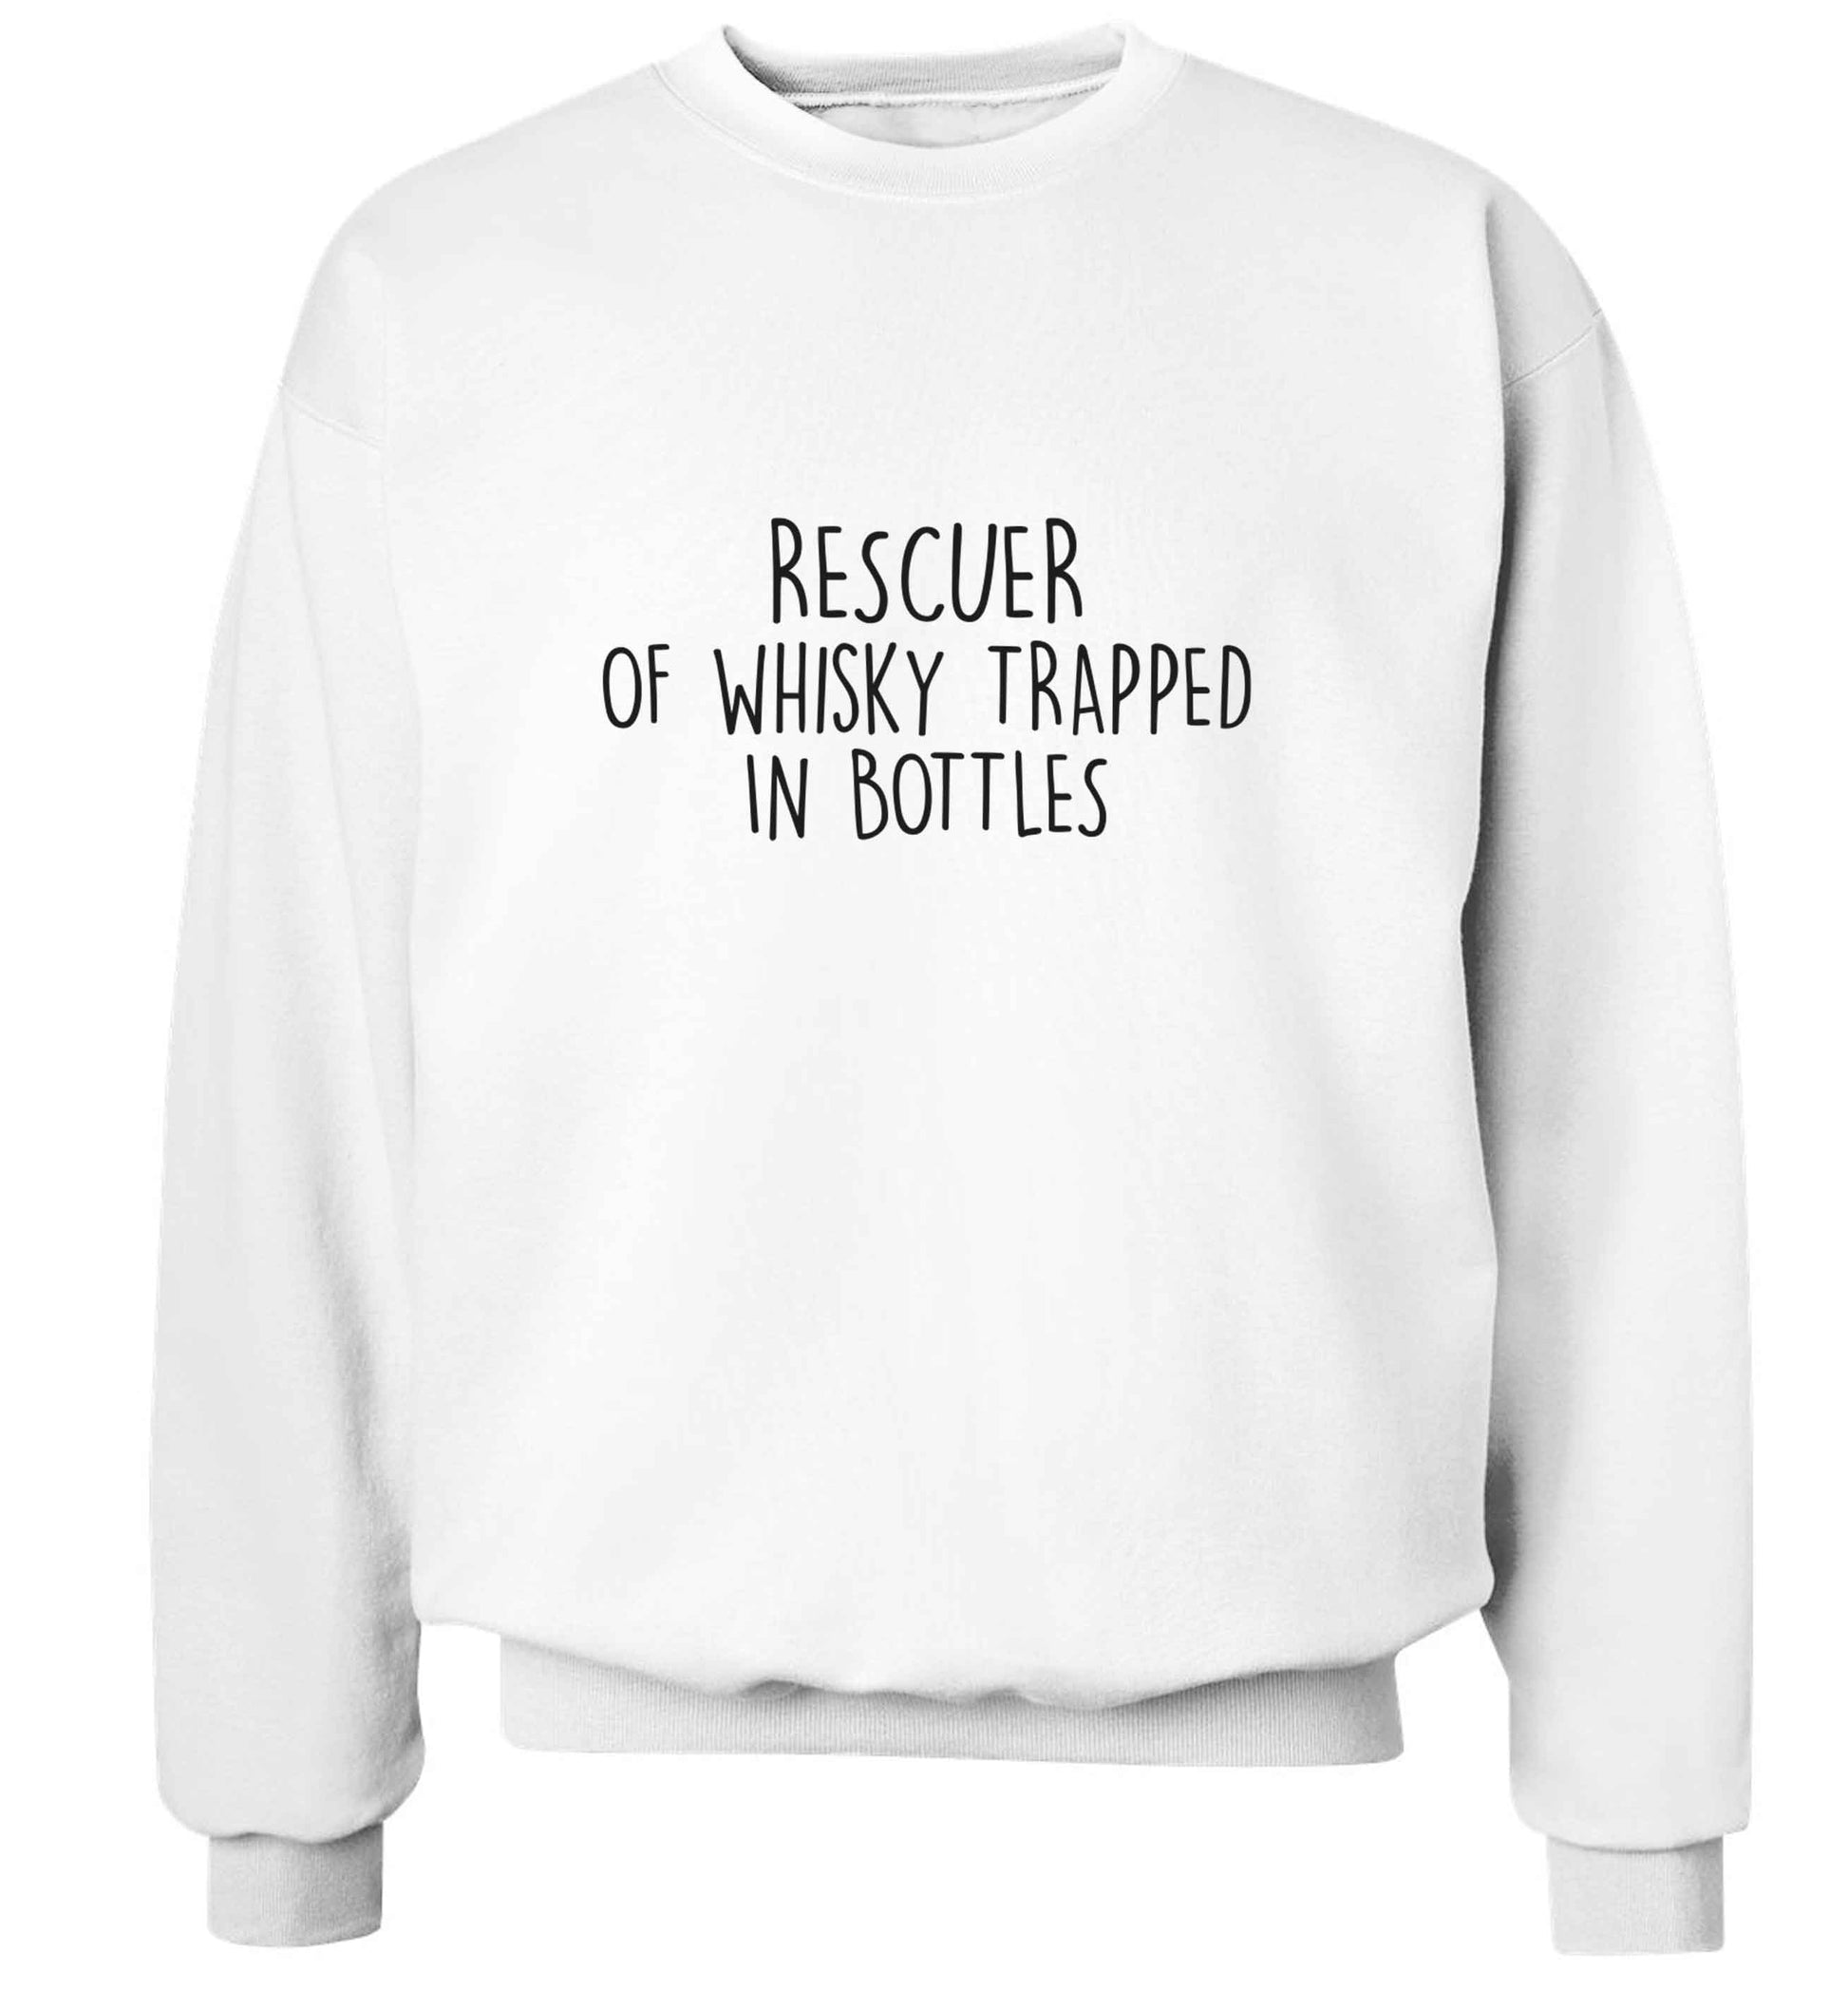 Rescuer of whisky trapped in bottles adult's unisex white sweater 2XL